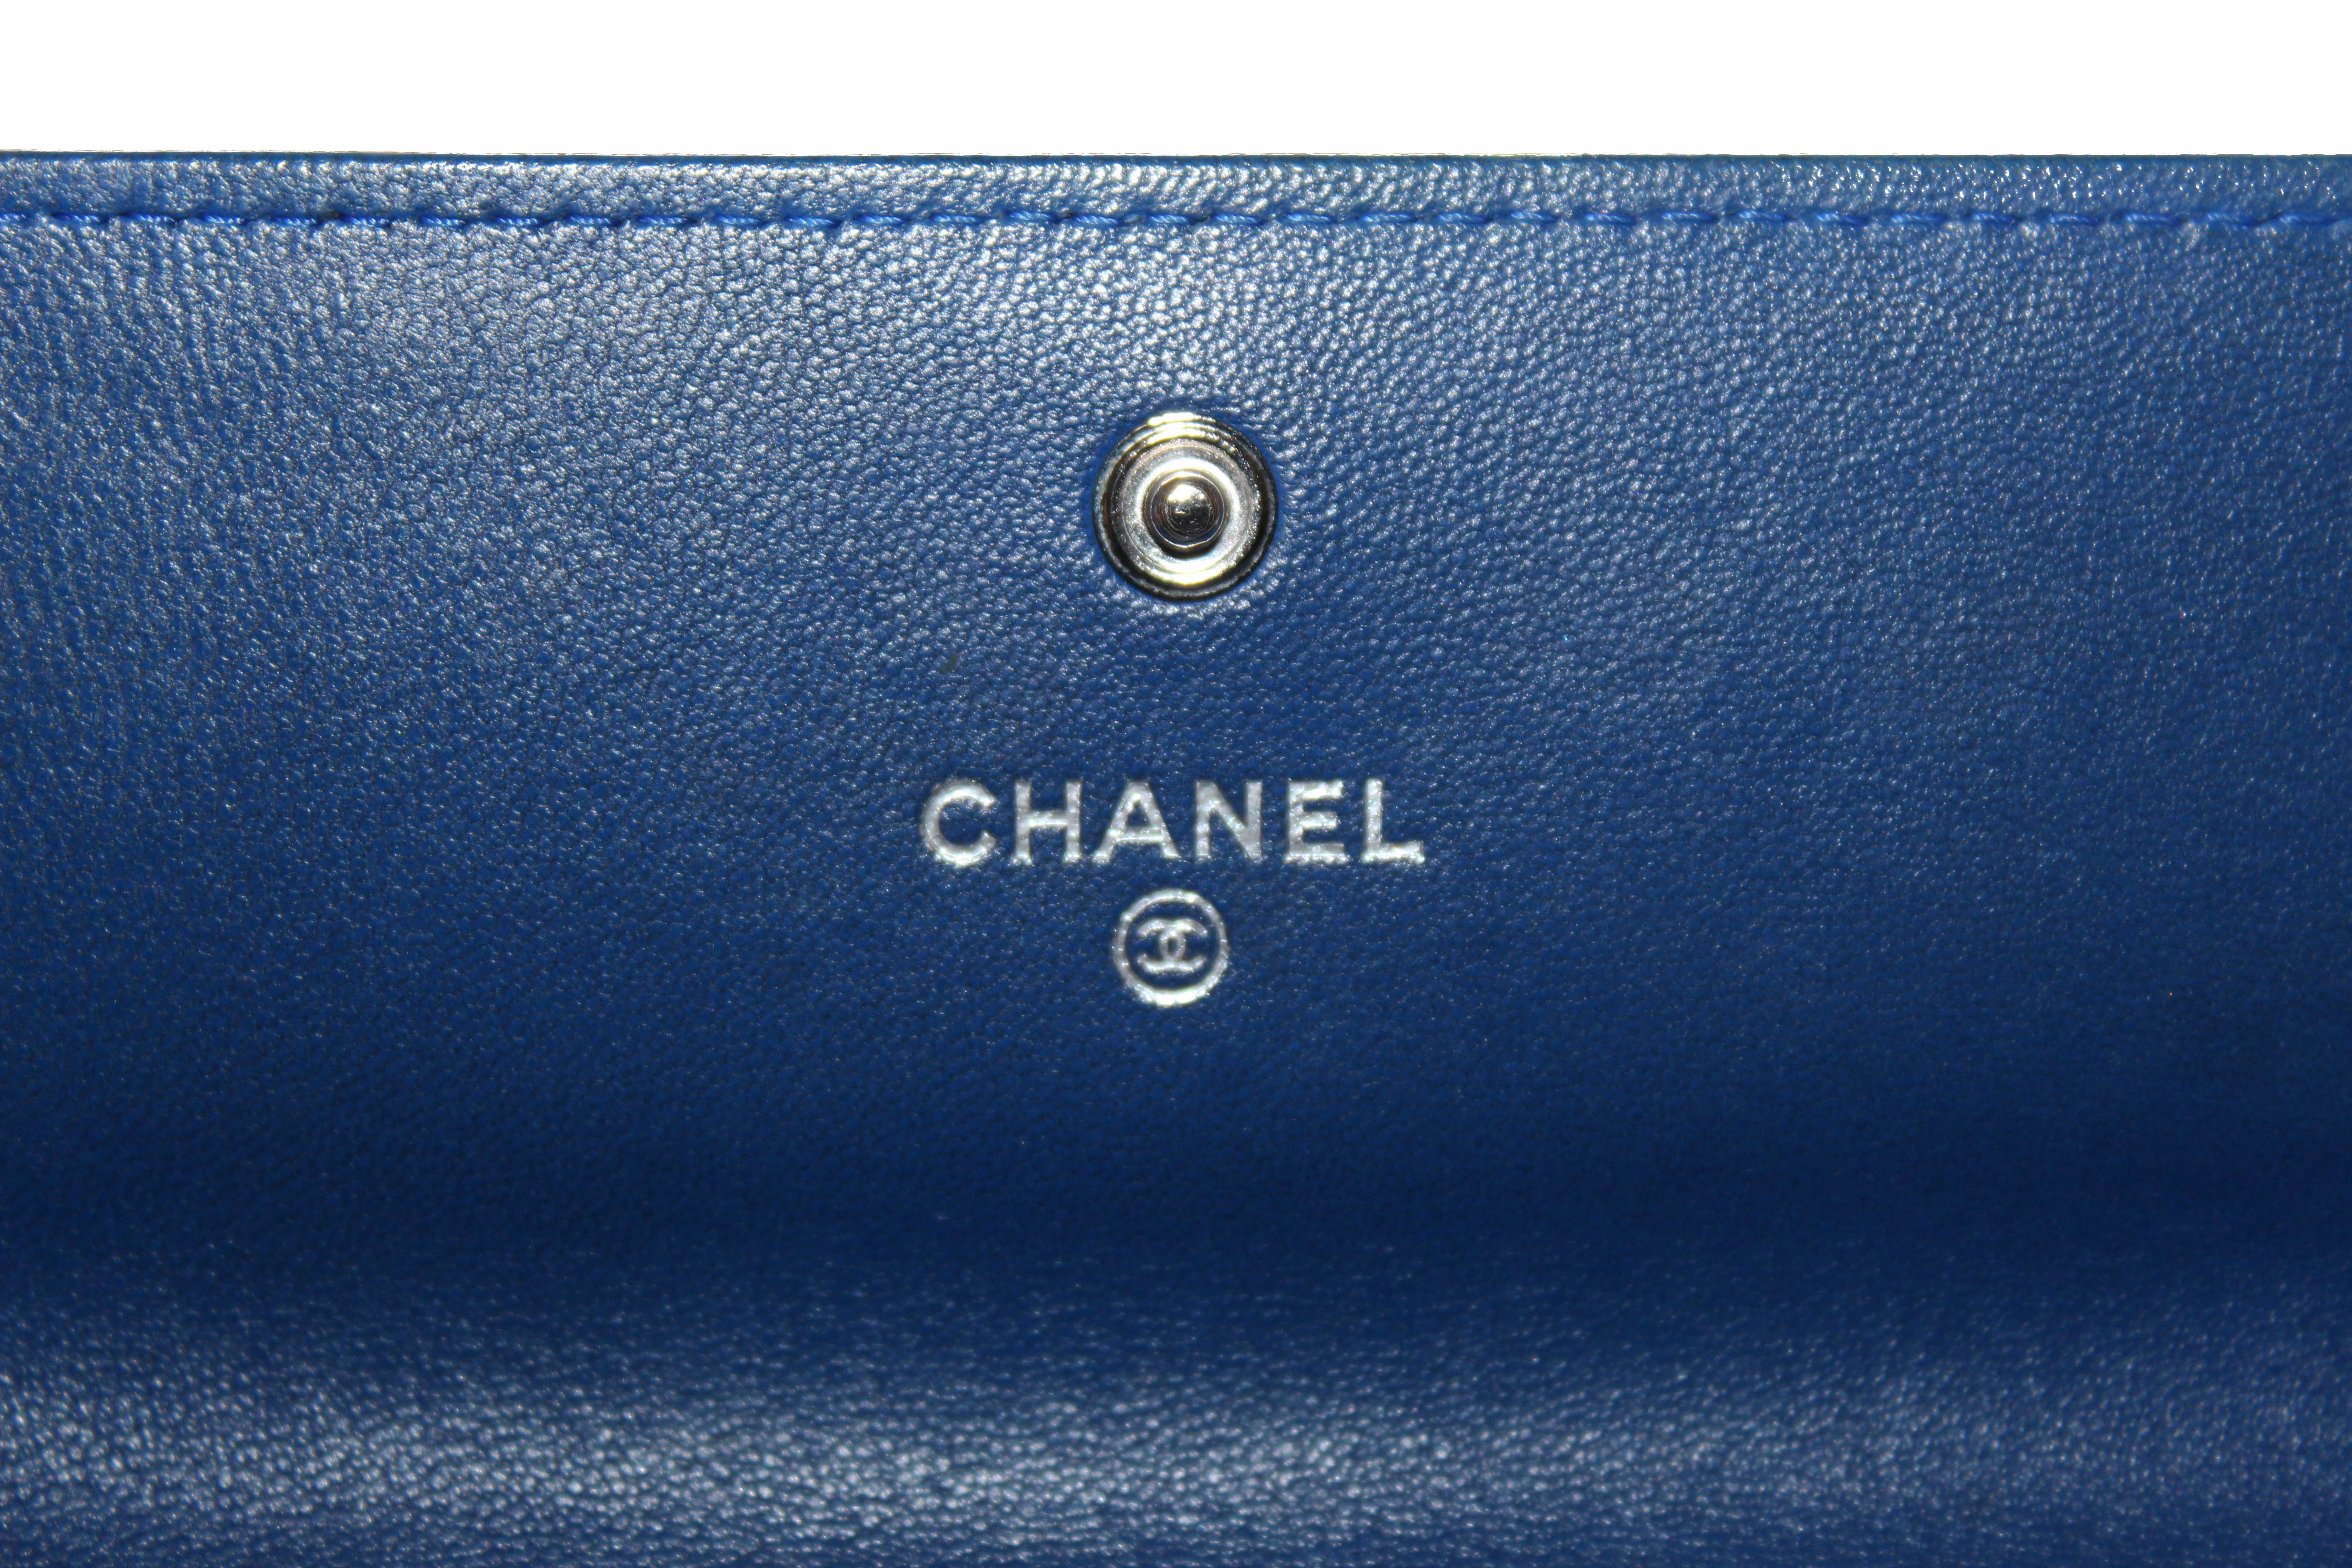 Chanel Turquoise Leather CC Camellia Flap Continental Wallet